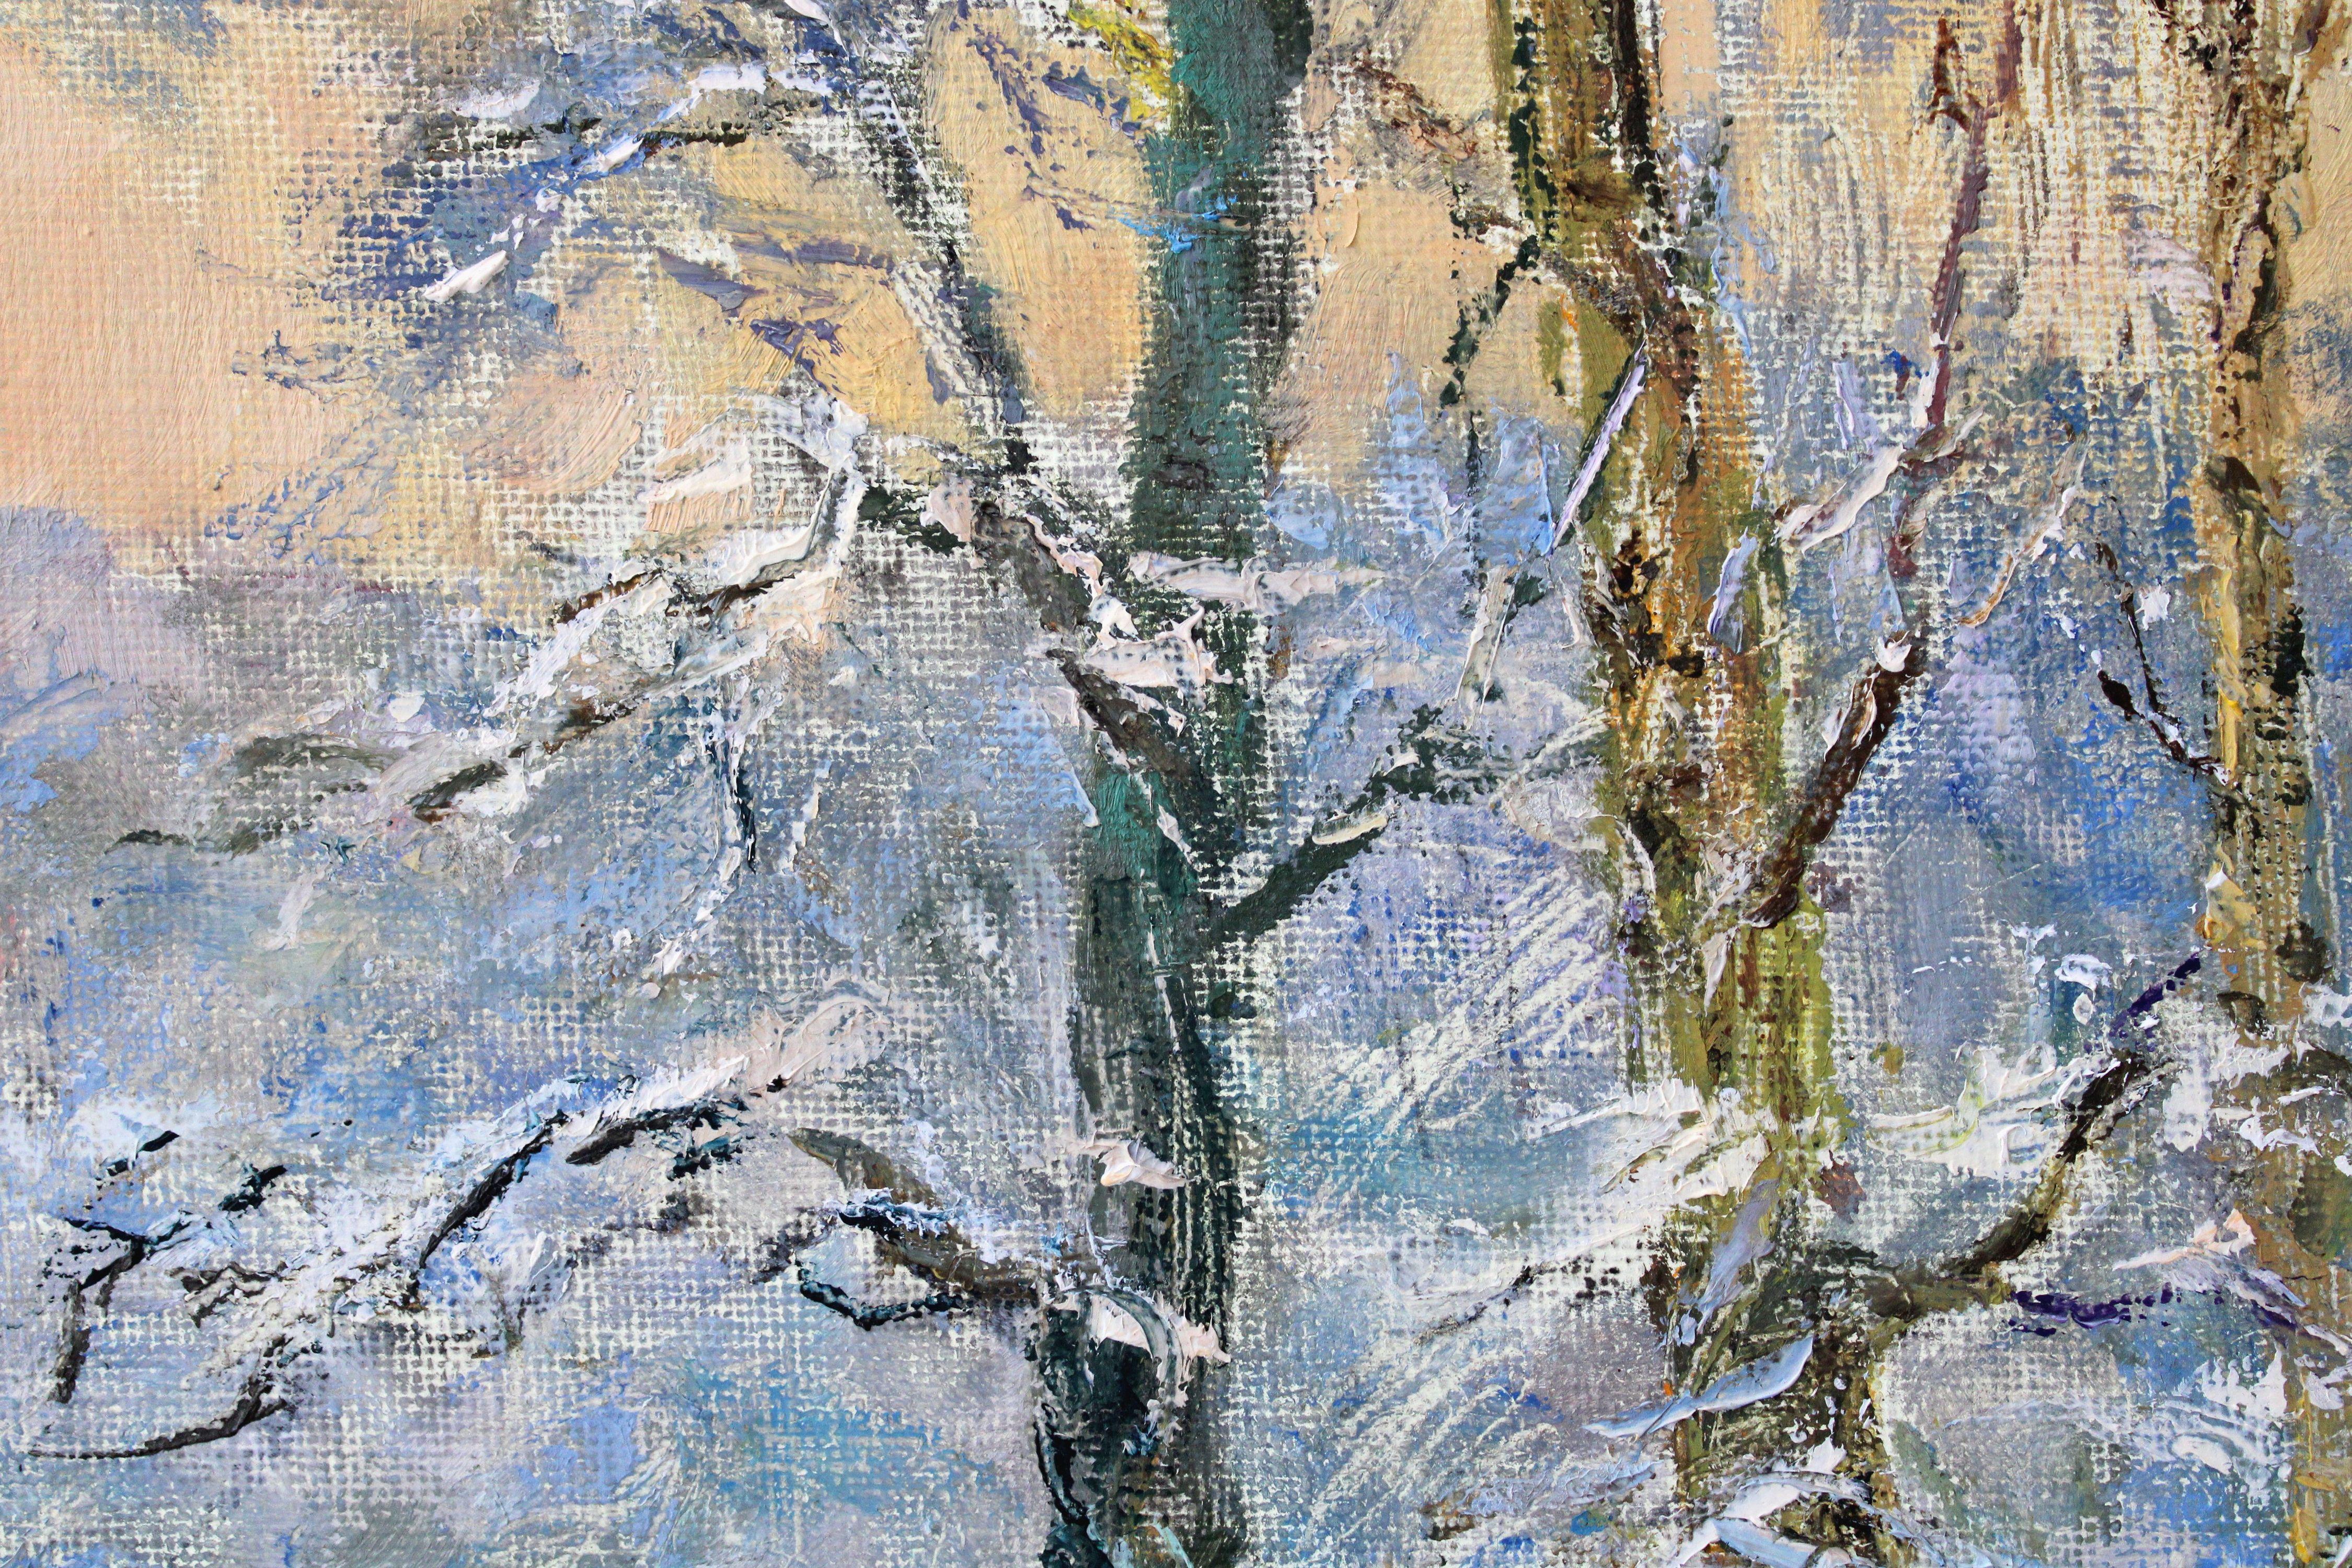 Winter. Oil on canvas, 60x80 cm - Gray Landscape Painting by Arnolds Pankoks